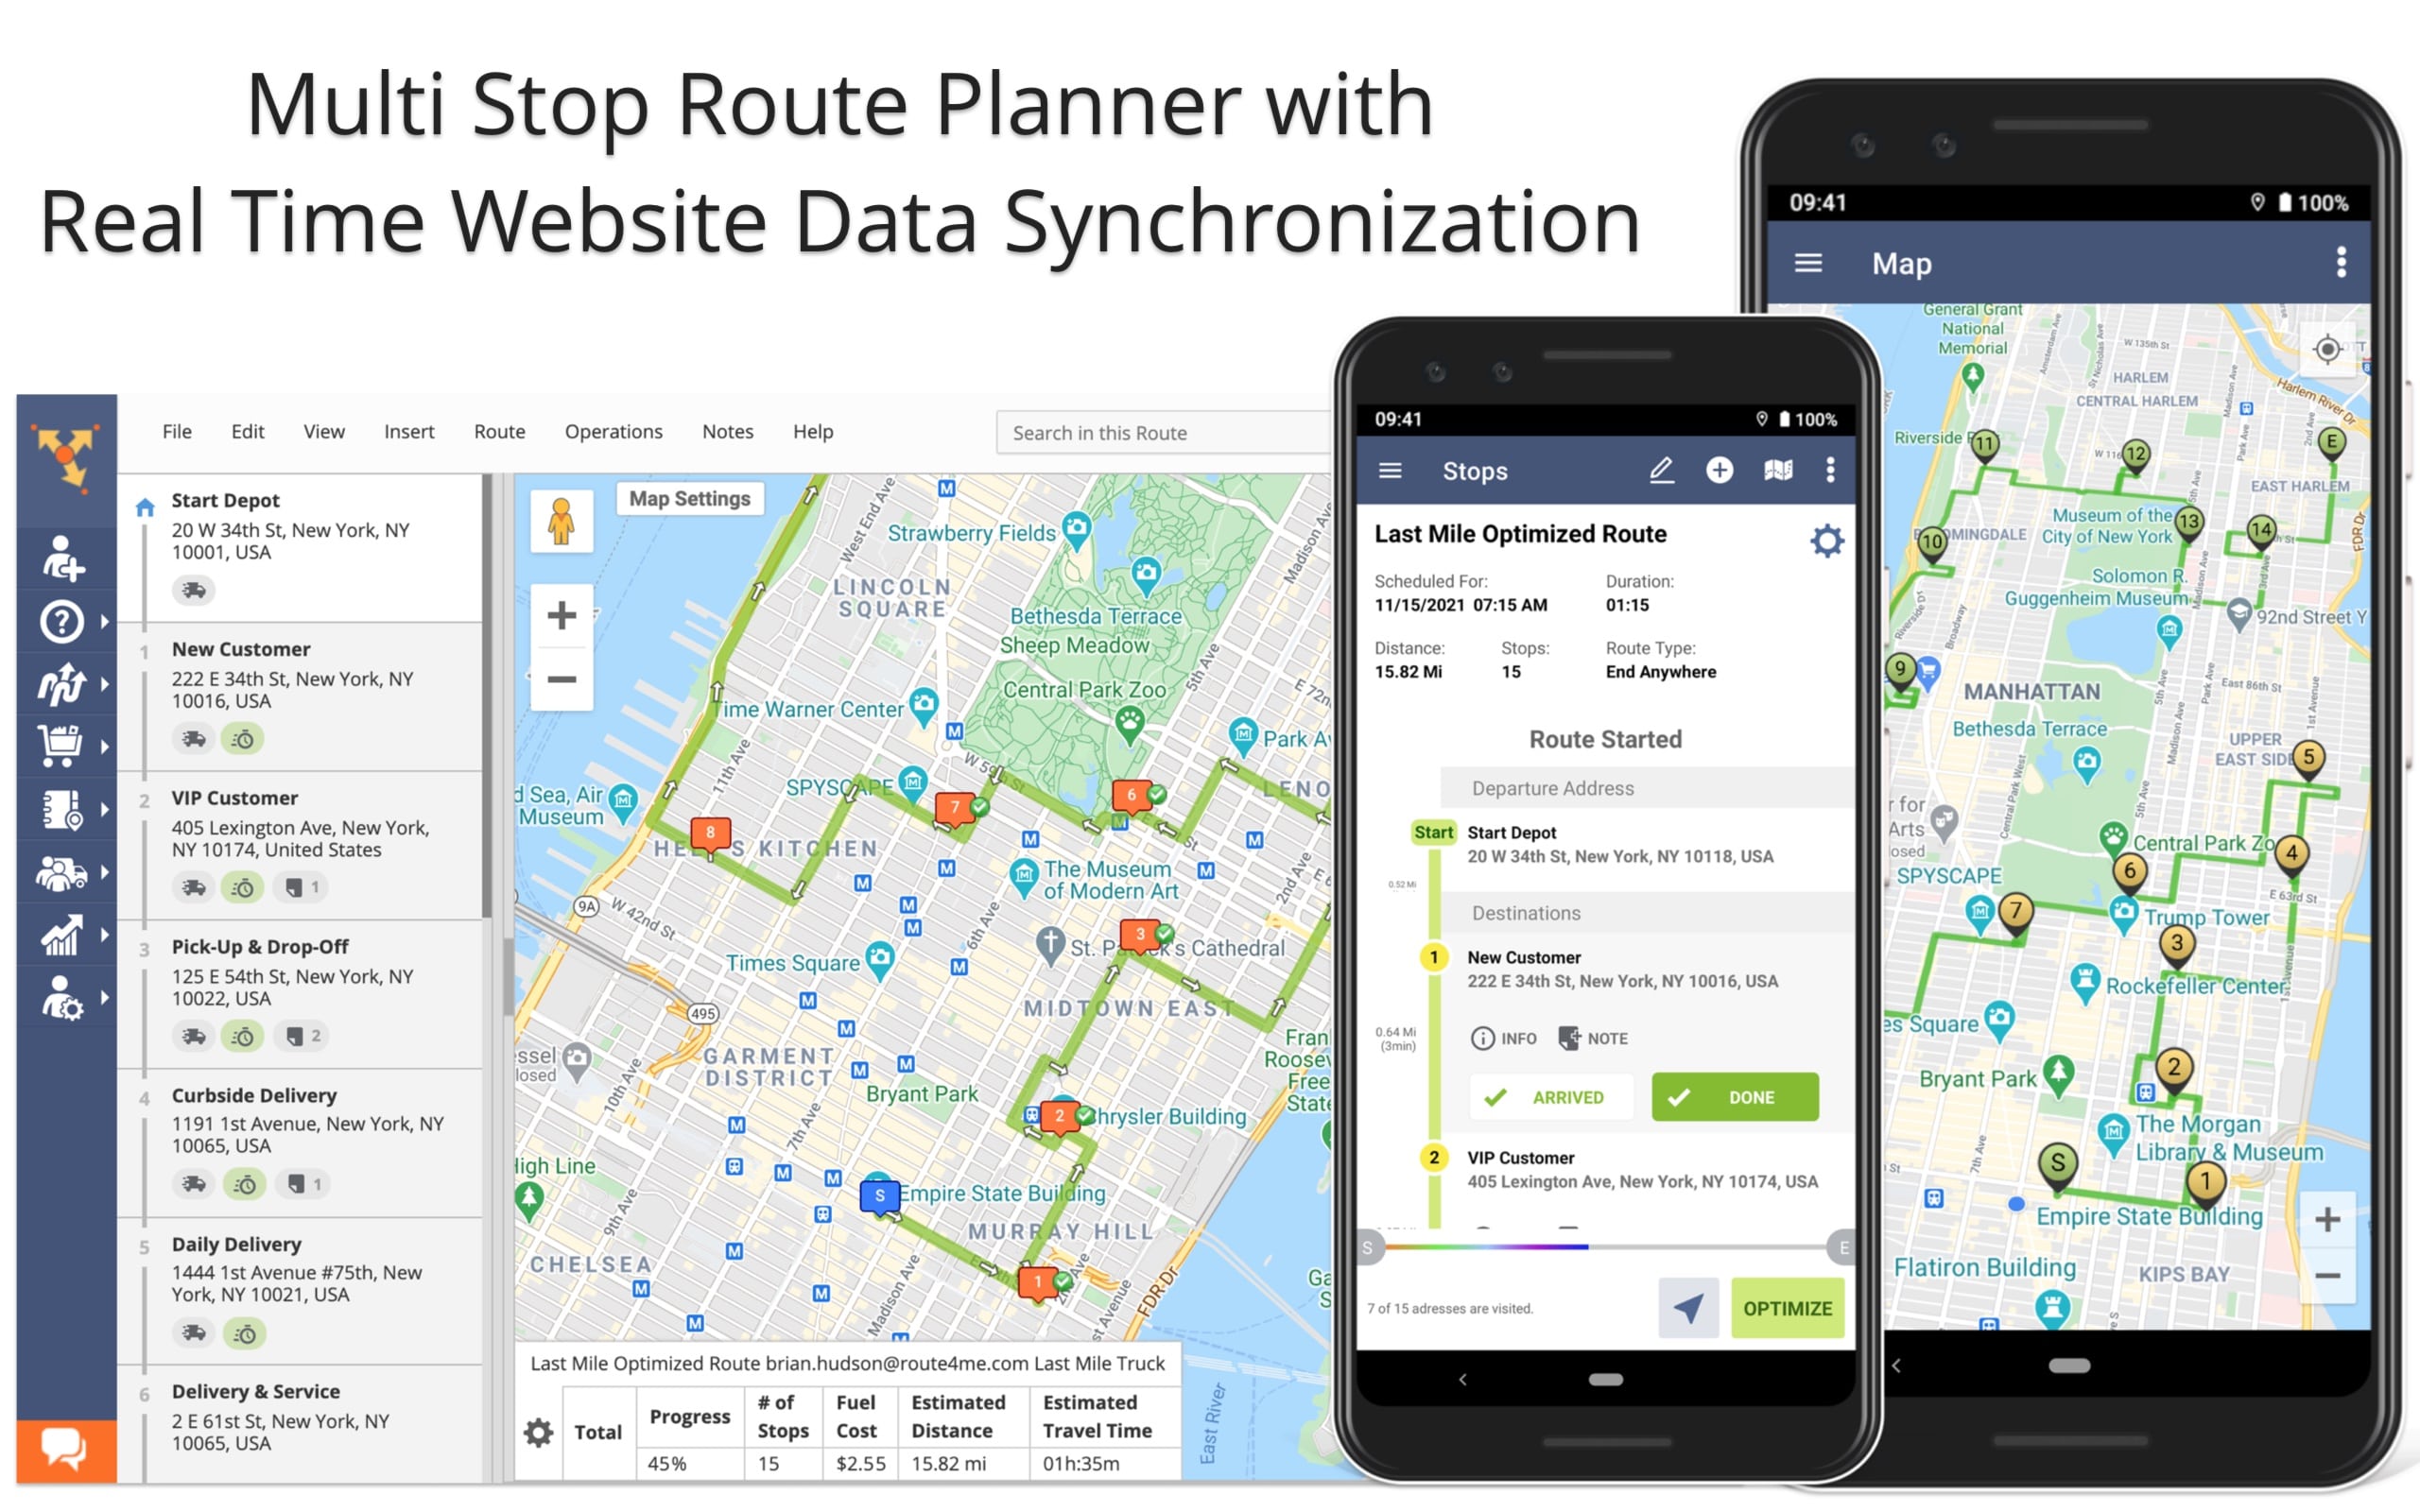 Mobile Multi Stop Route Planner app with real-time website data synchronization